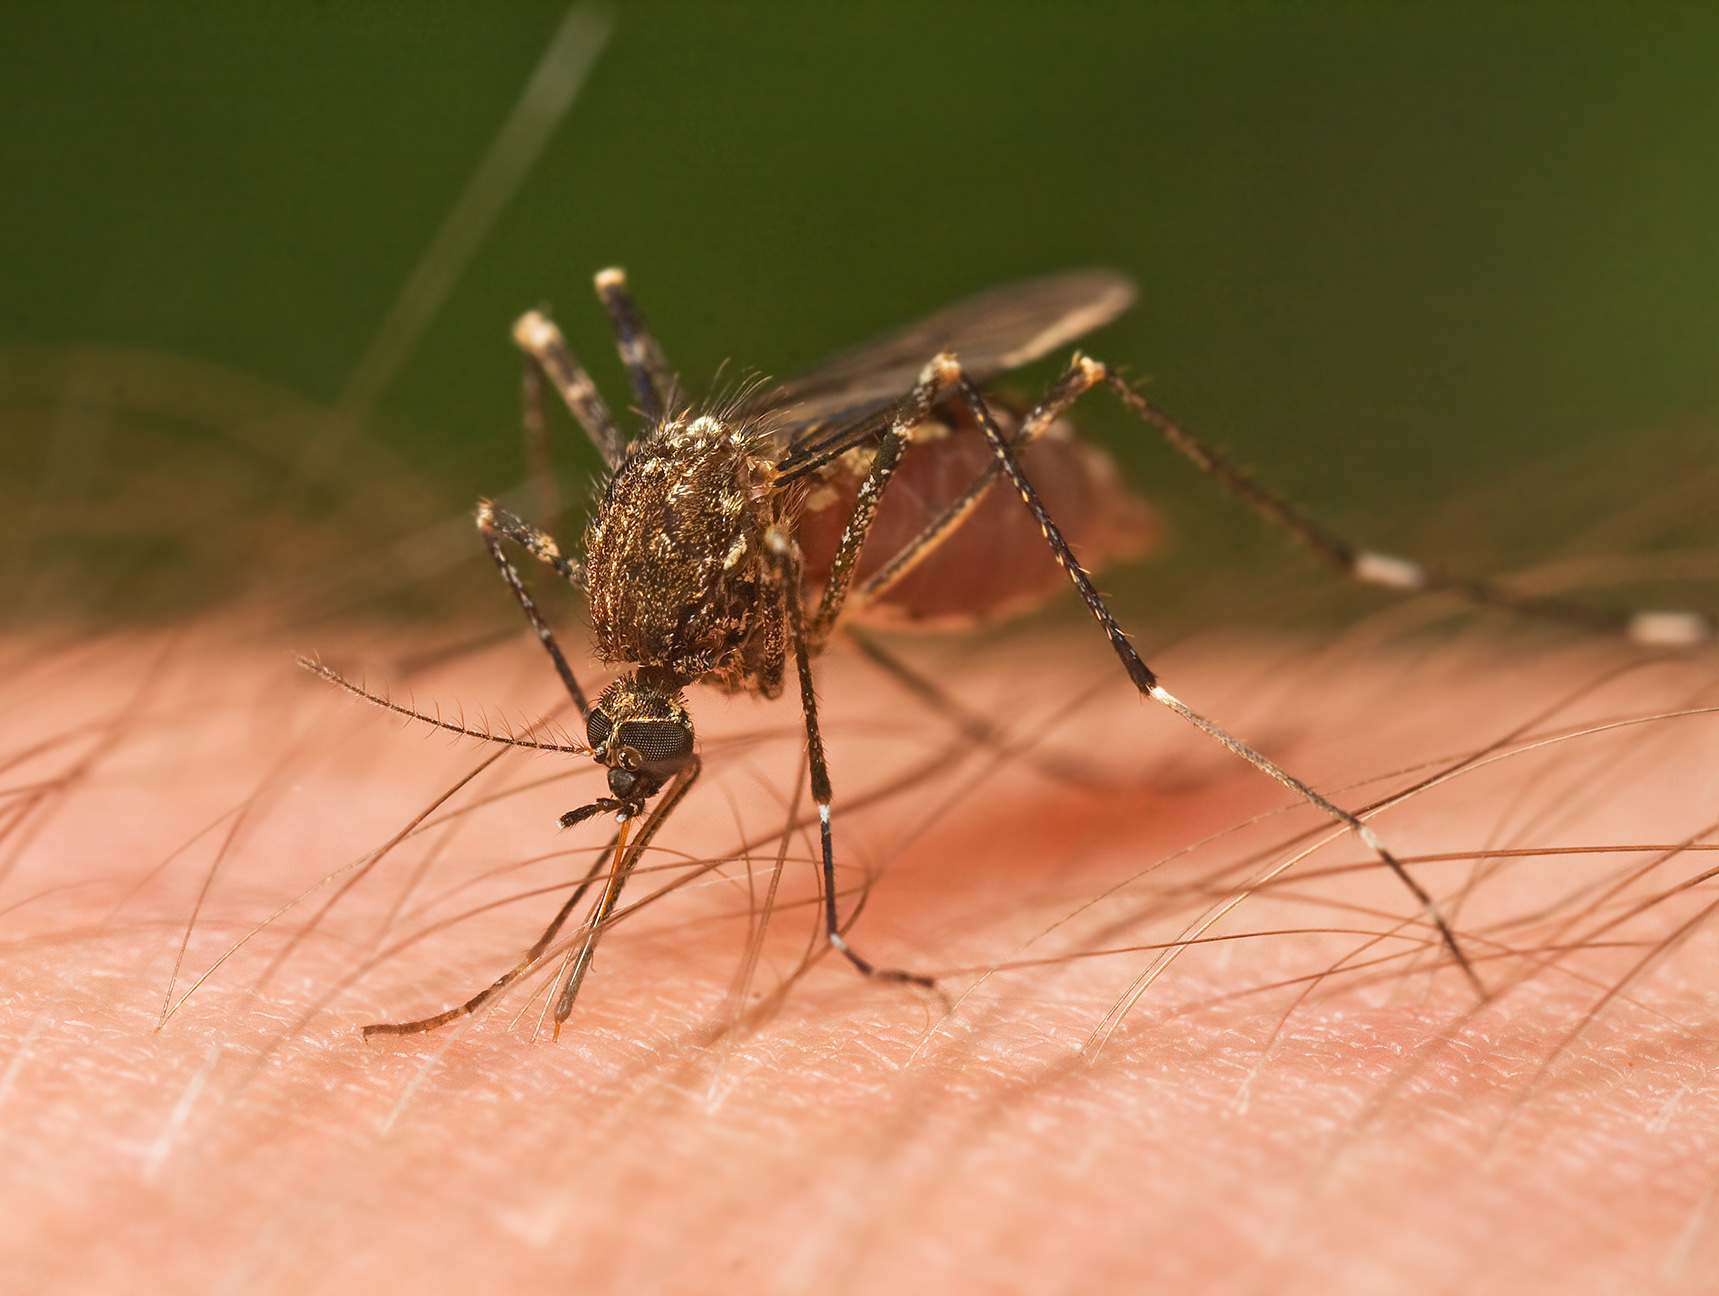 Close-up photo of a mosquito about to bite a human